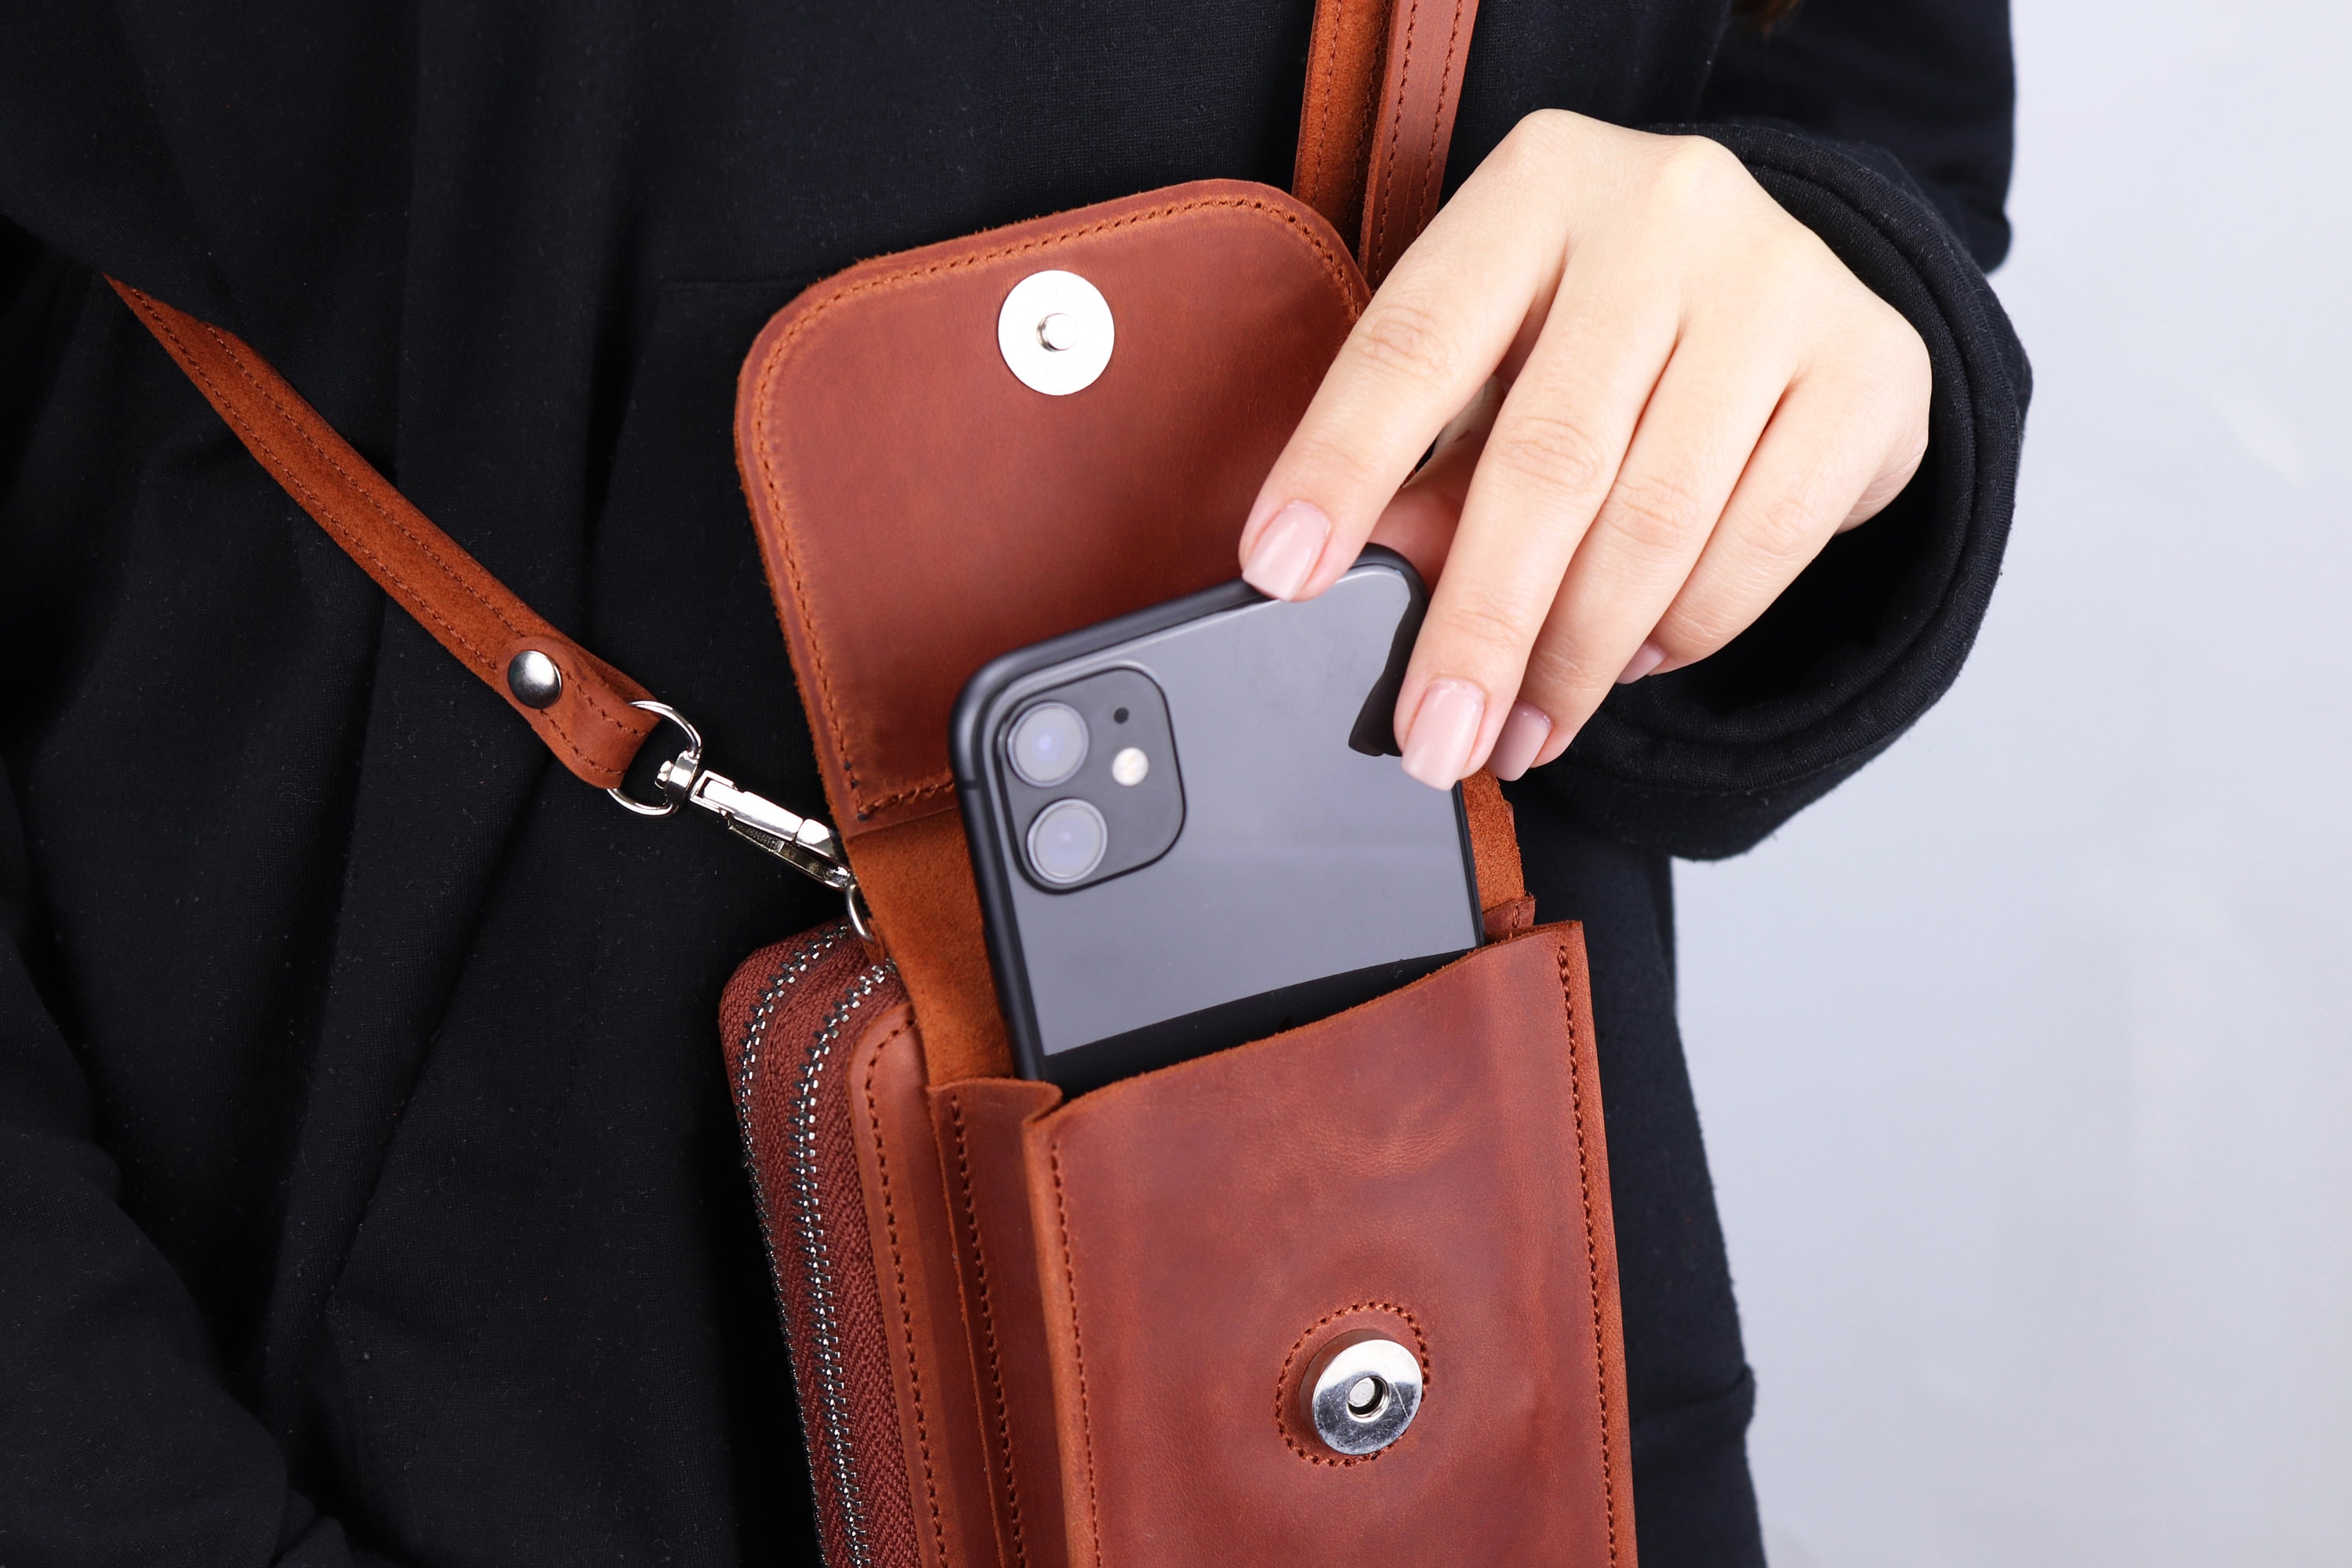 Leather Crossbody Bag for Phone | Minimalist Pocket with Long Strap